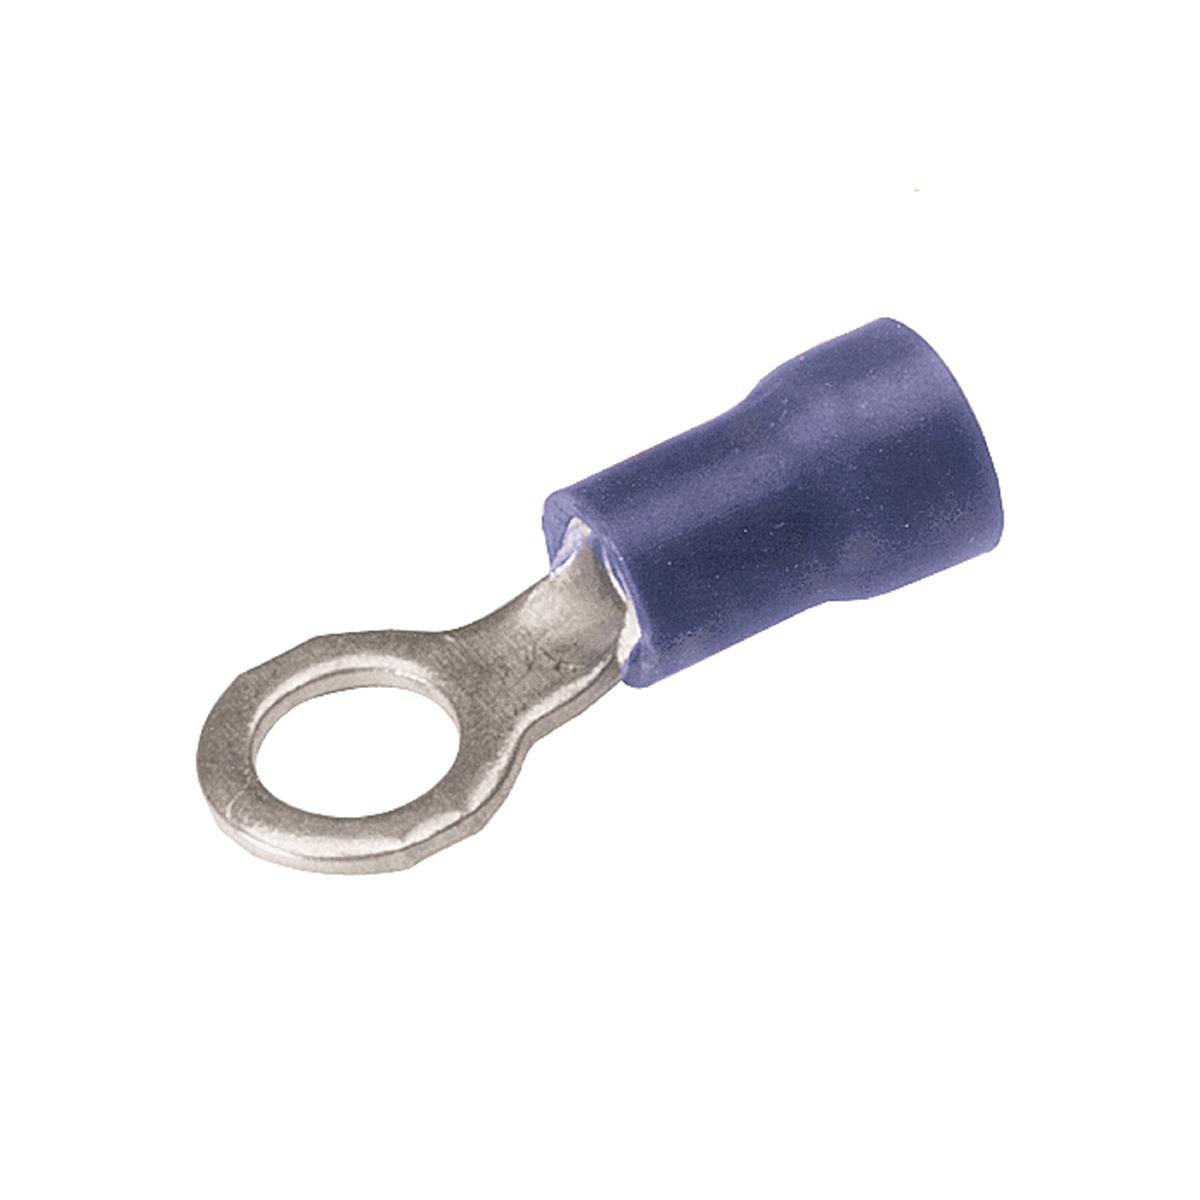 Hubbell BA14E6 Vinyl Ring Terminal For 16 - 14 AWG.  ; Expanded insulation support accepts standard and large wire diameters providing lower inventory requirements and greater flexibility ; Funnel entry for easy wire insertion ; Manufactured of pure electrolytic copper 